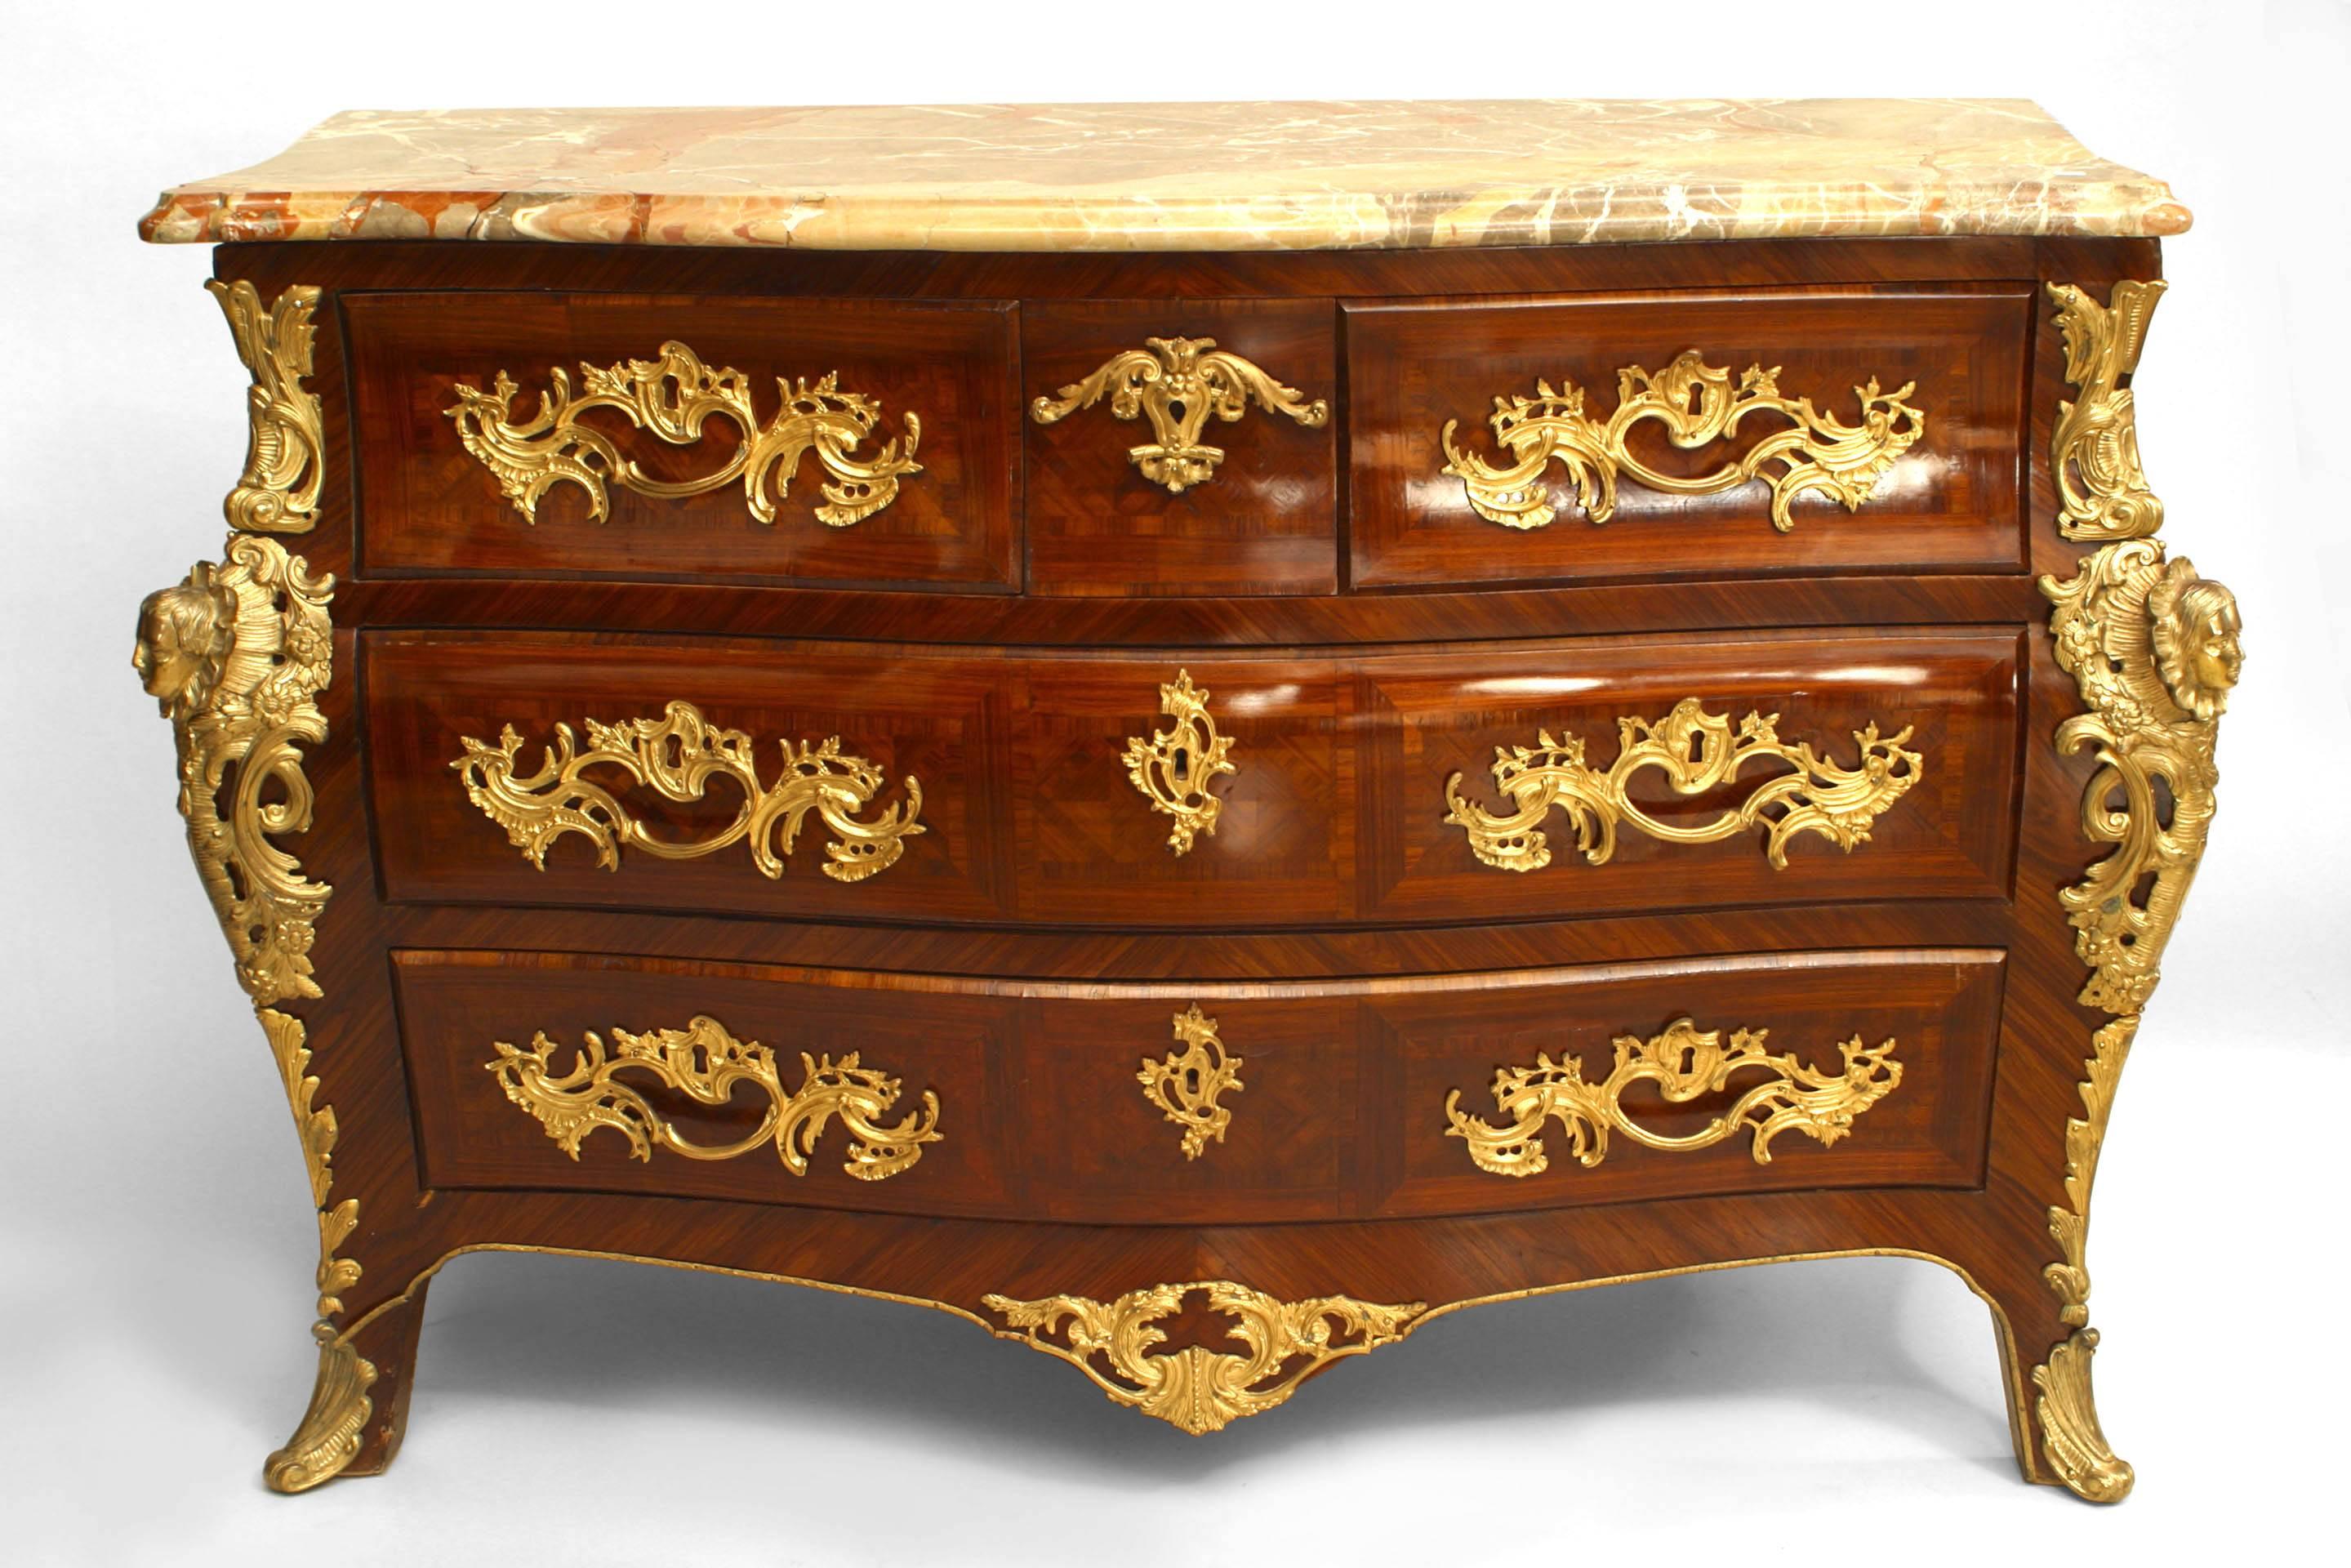 French Louis XV style (19th Century with some mount replacements) kingwood commode with 3 drawers and bronze trim with a marble top.
